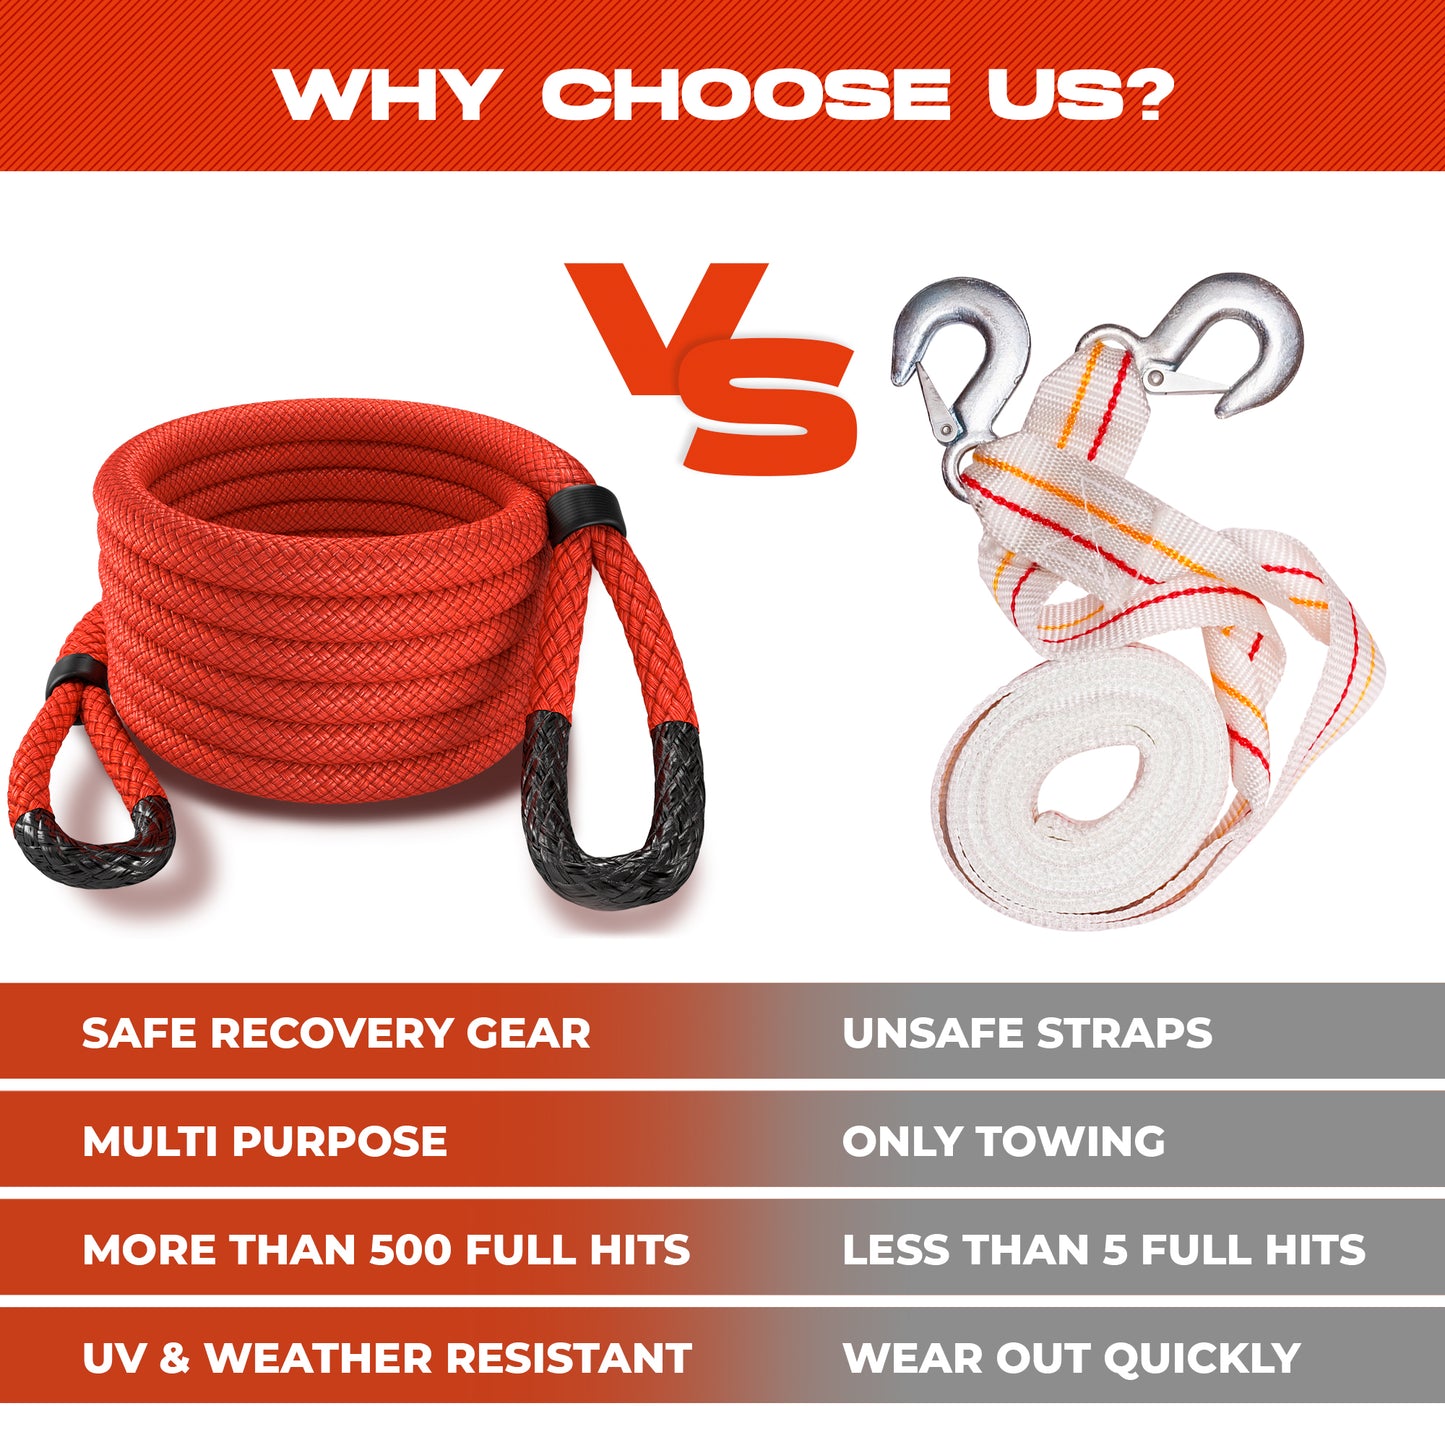 Kinetic Recovery Rope - Miolle 1"x30' Red (33,900 lbs), with 2 Spectra Fiber Soft Shackles 3/8' x 6" (35000 lbs)